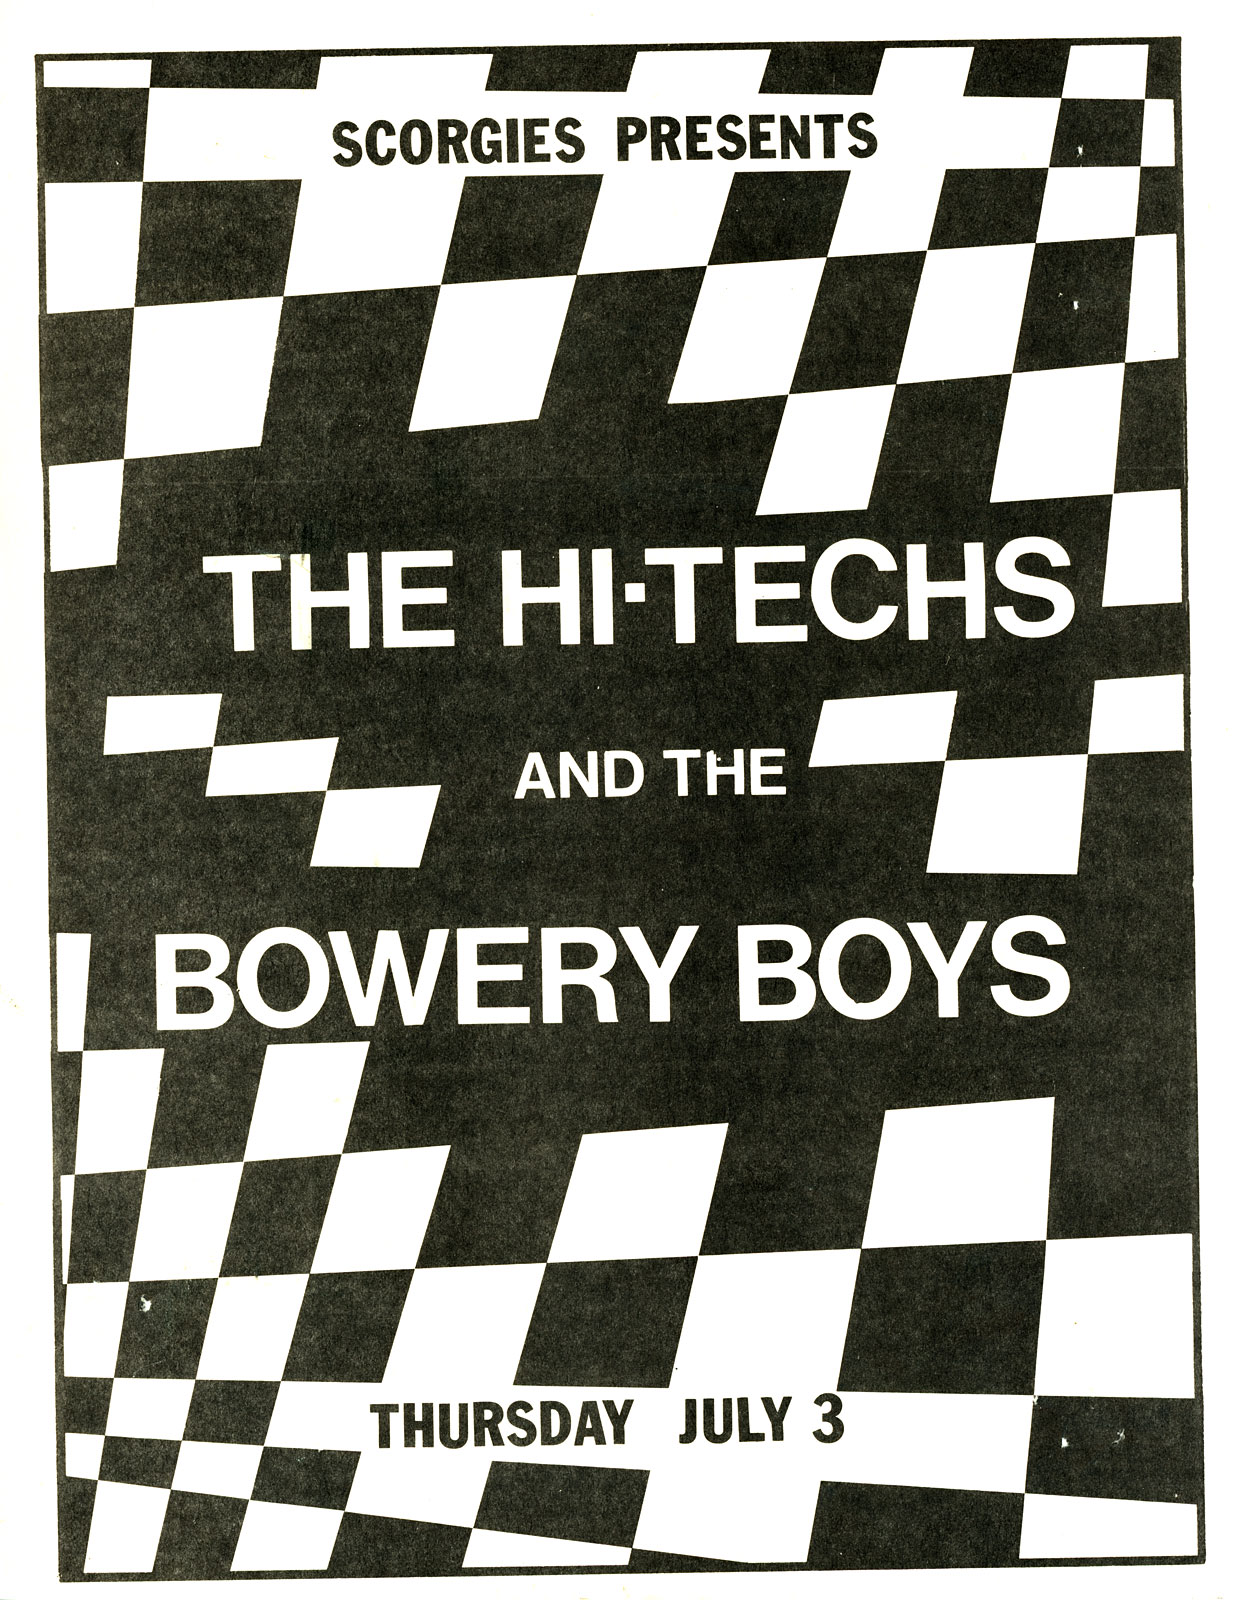 Poster for Hi-Techs and Bowery Boys at Scorgie's in Rochester, New York 07.03.1980